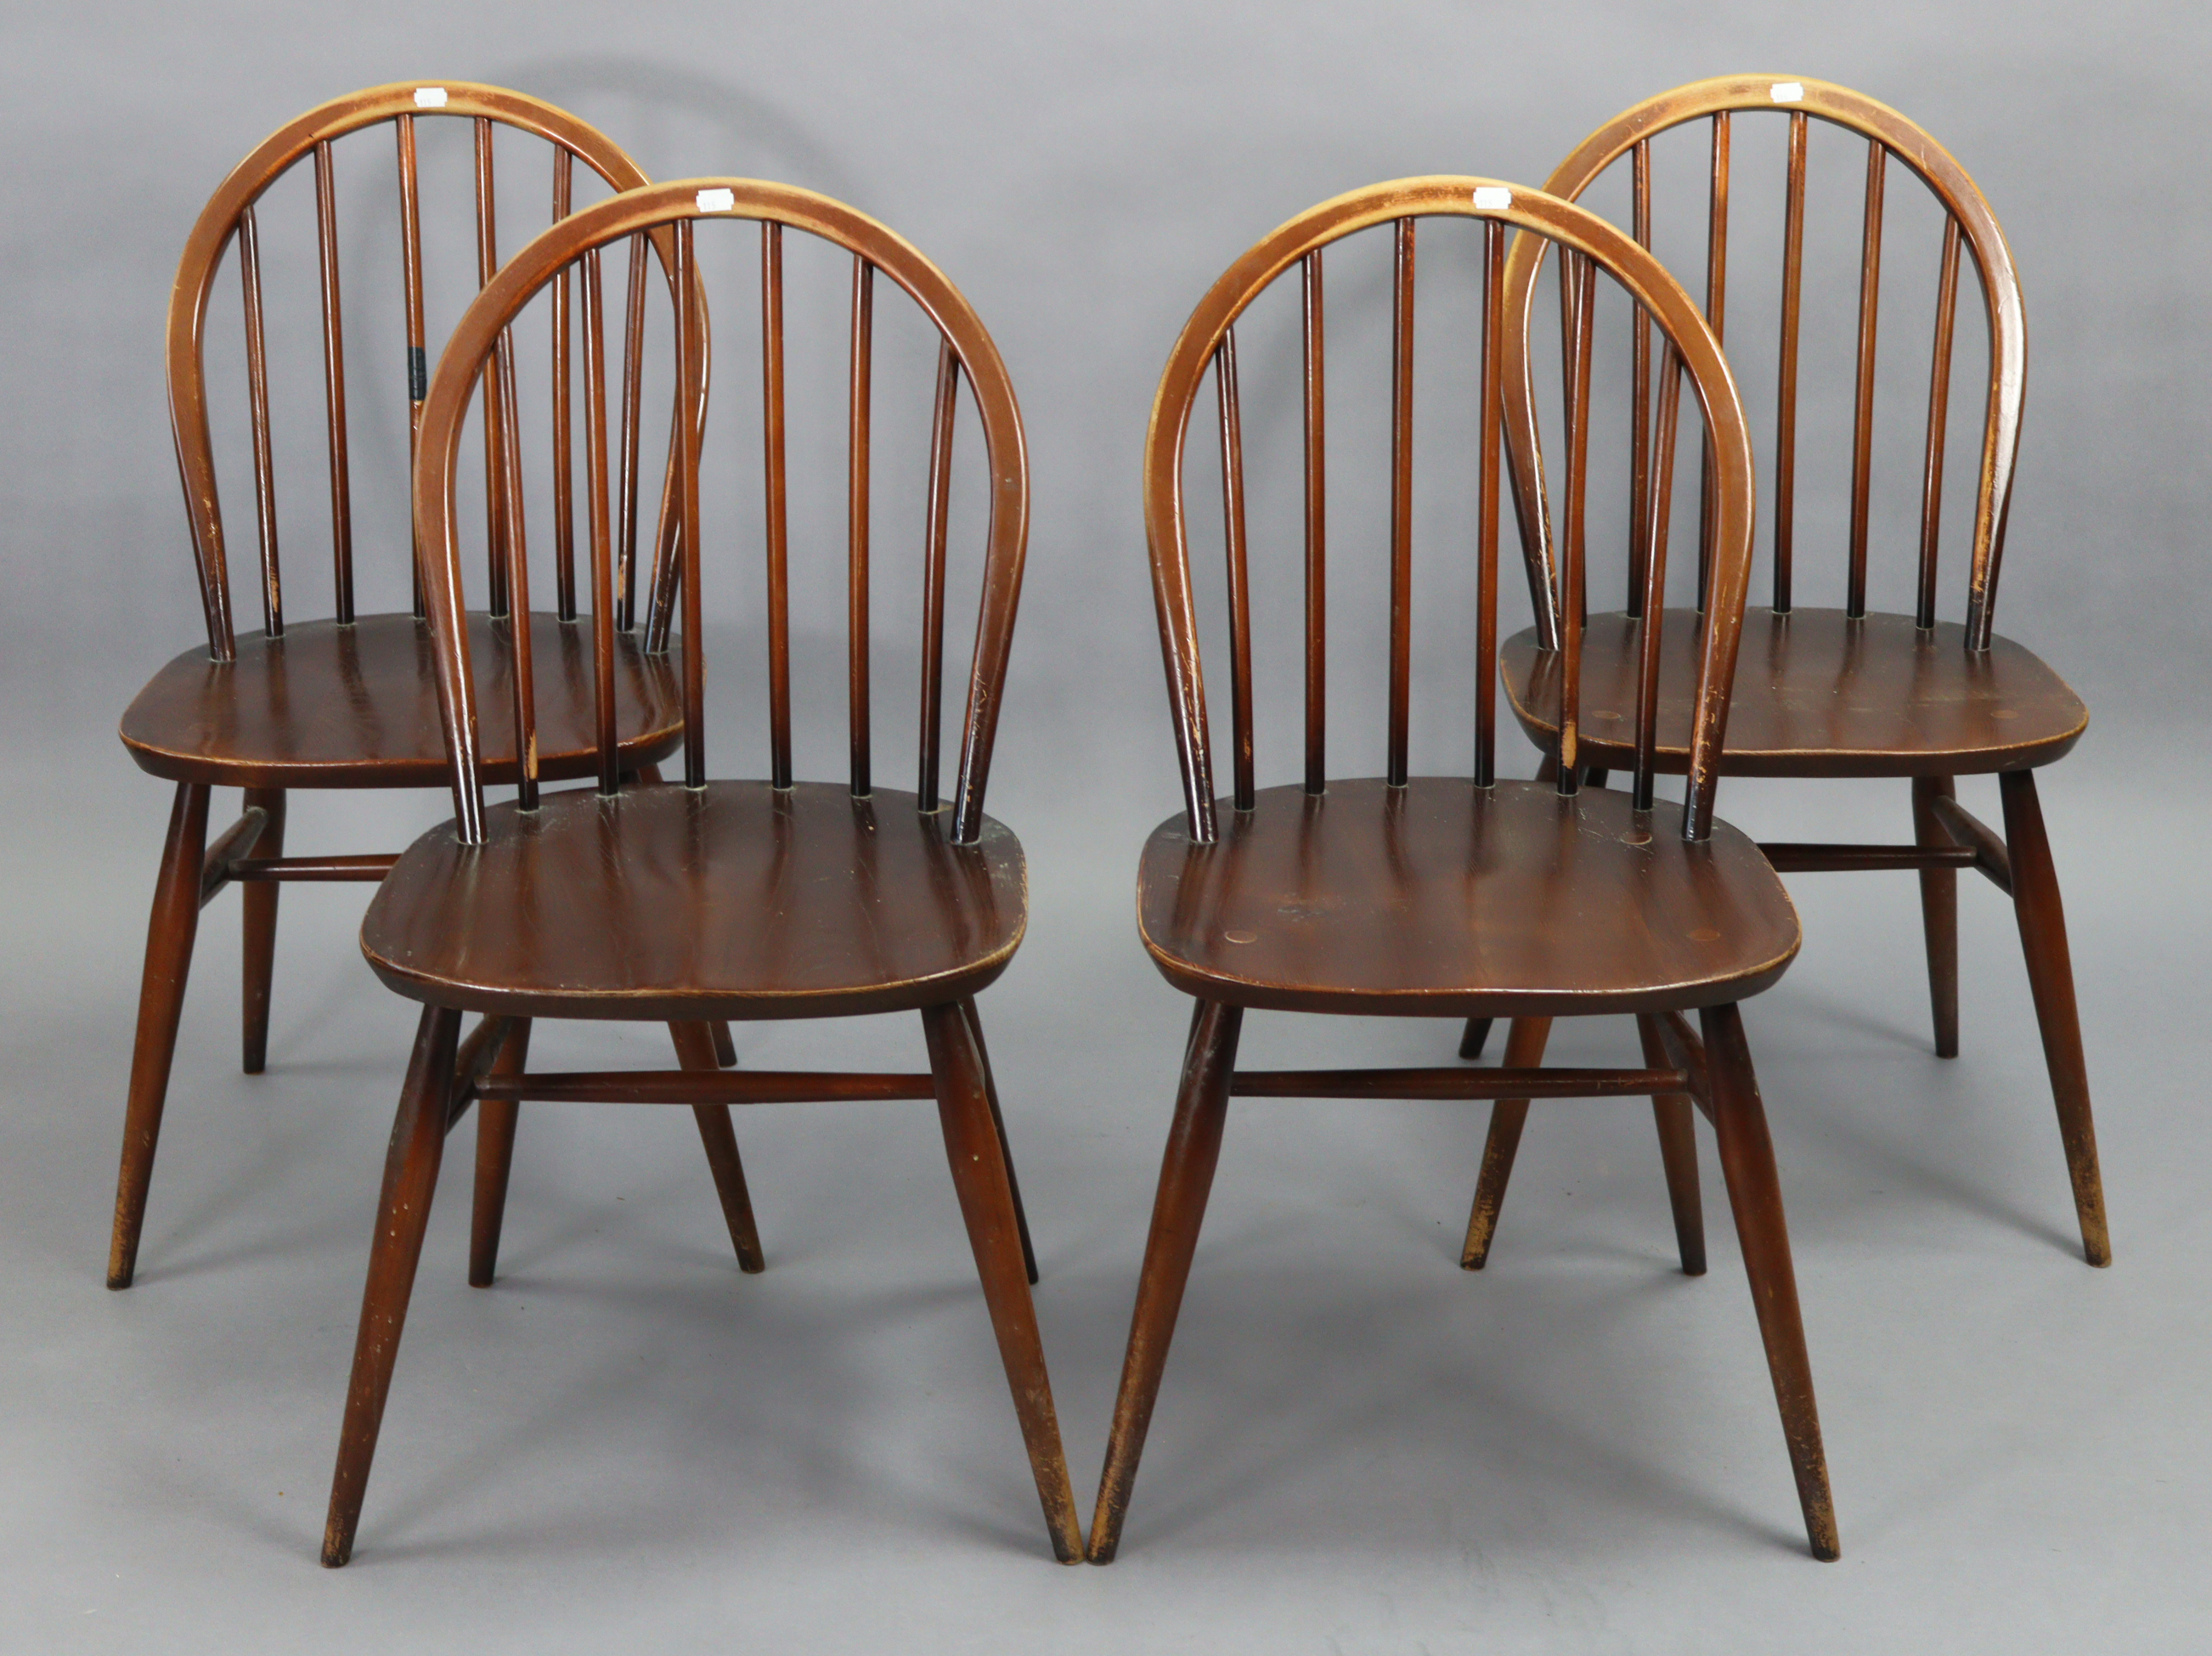 A set of four Ercol spindle-back dining chairs with hard seats, & on round tapered legs with spindle